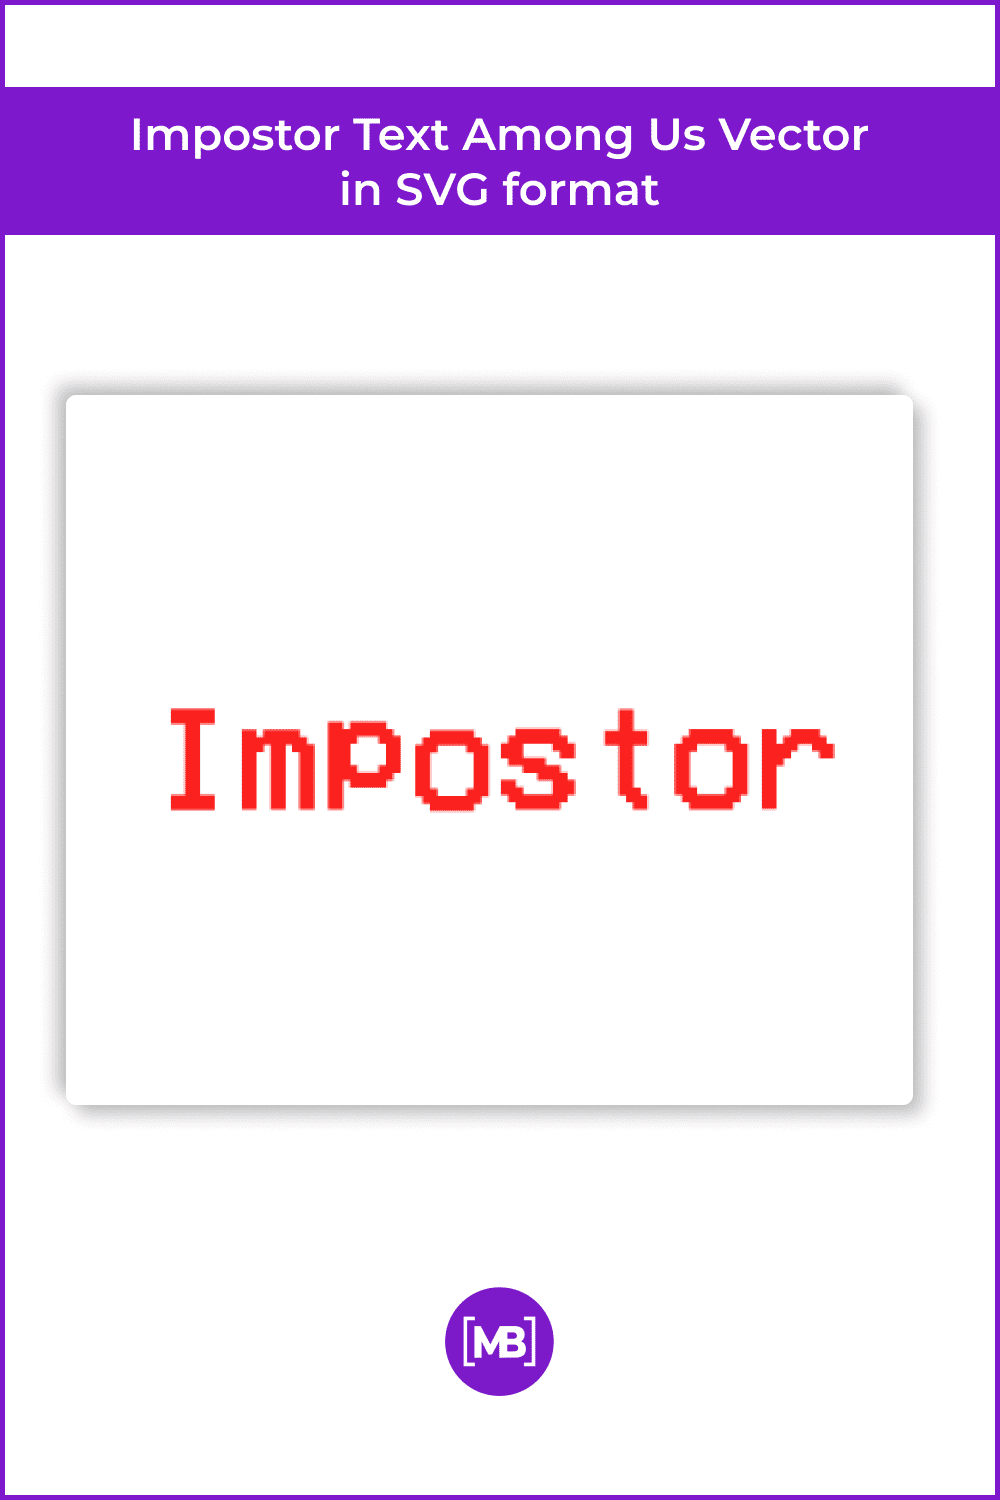 Impostor Text Among Us Vector in SVG format.